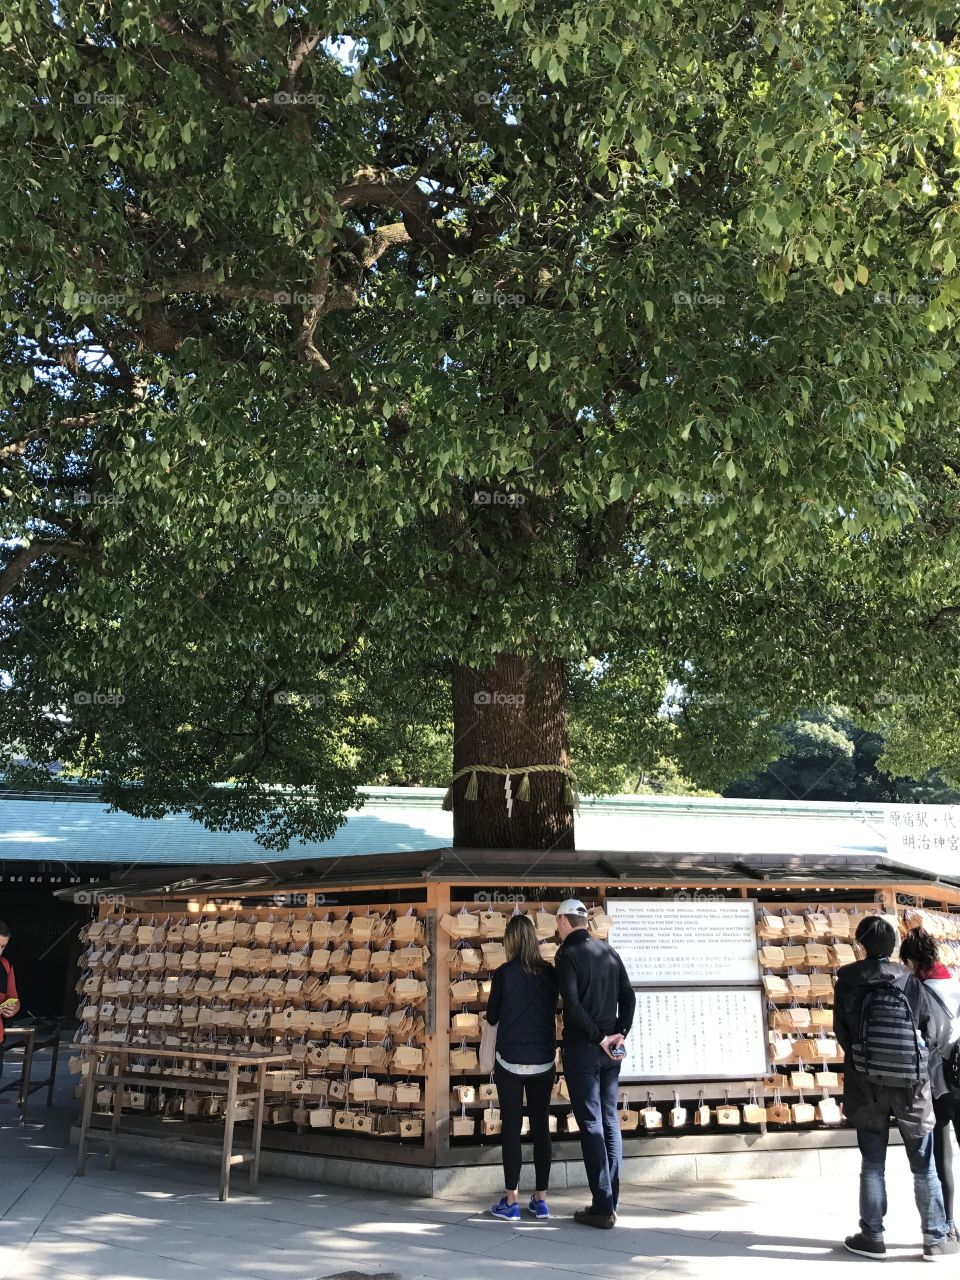 Japan temple, Meiji Shrine, located in Shibuya, Tokyo, is the Shinto shrine that is dedicated to the deified spirits of Emperor Meiji and his wife, Empress Shōken. Tree of worship 